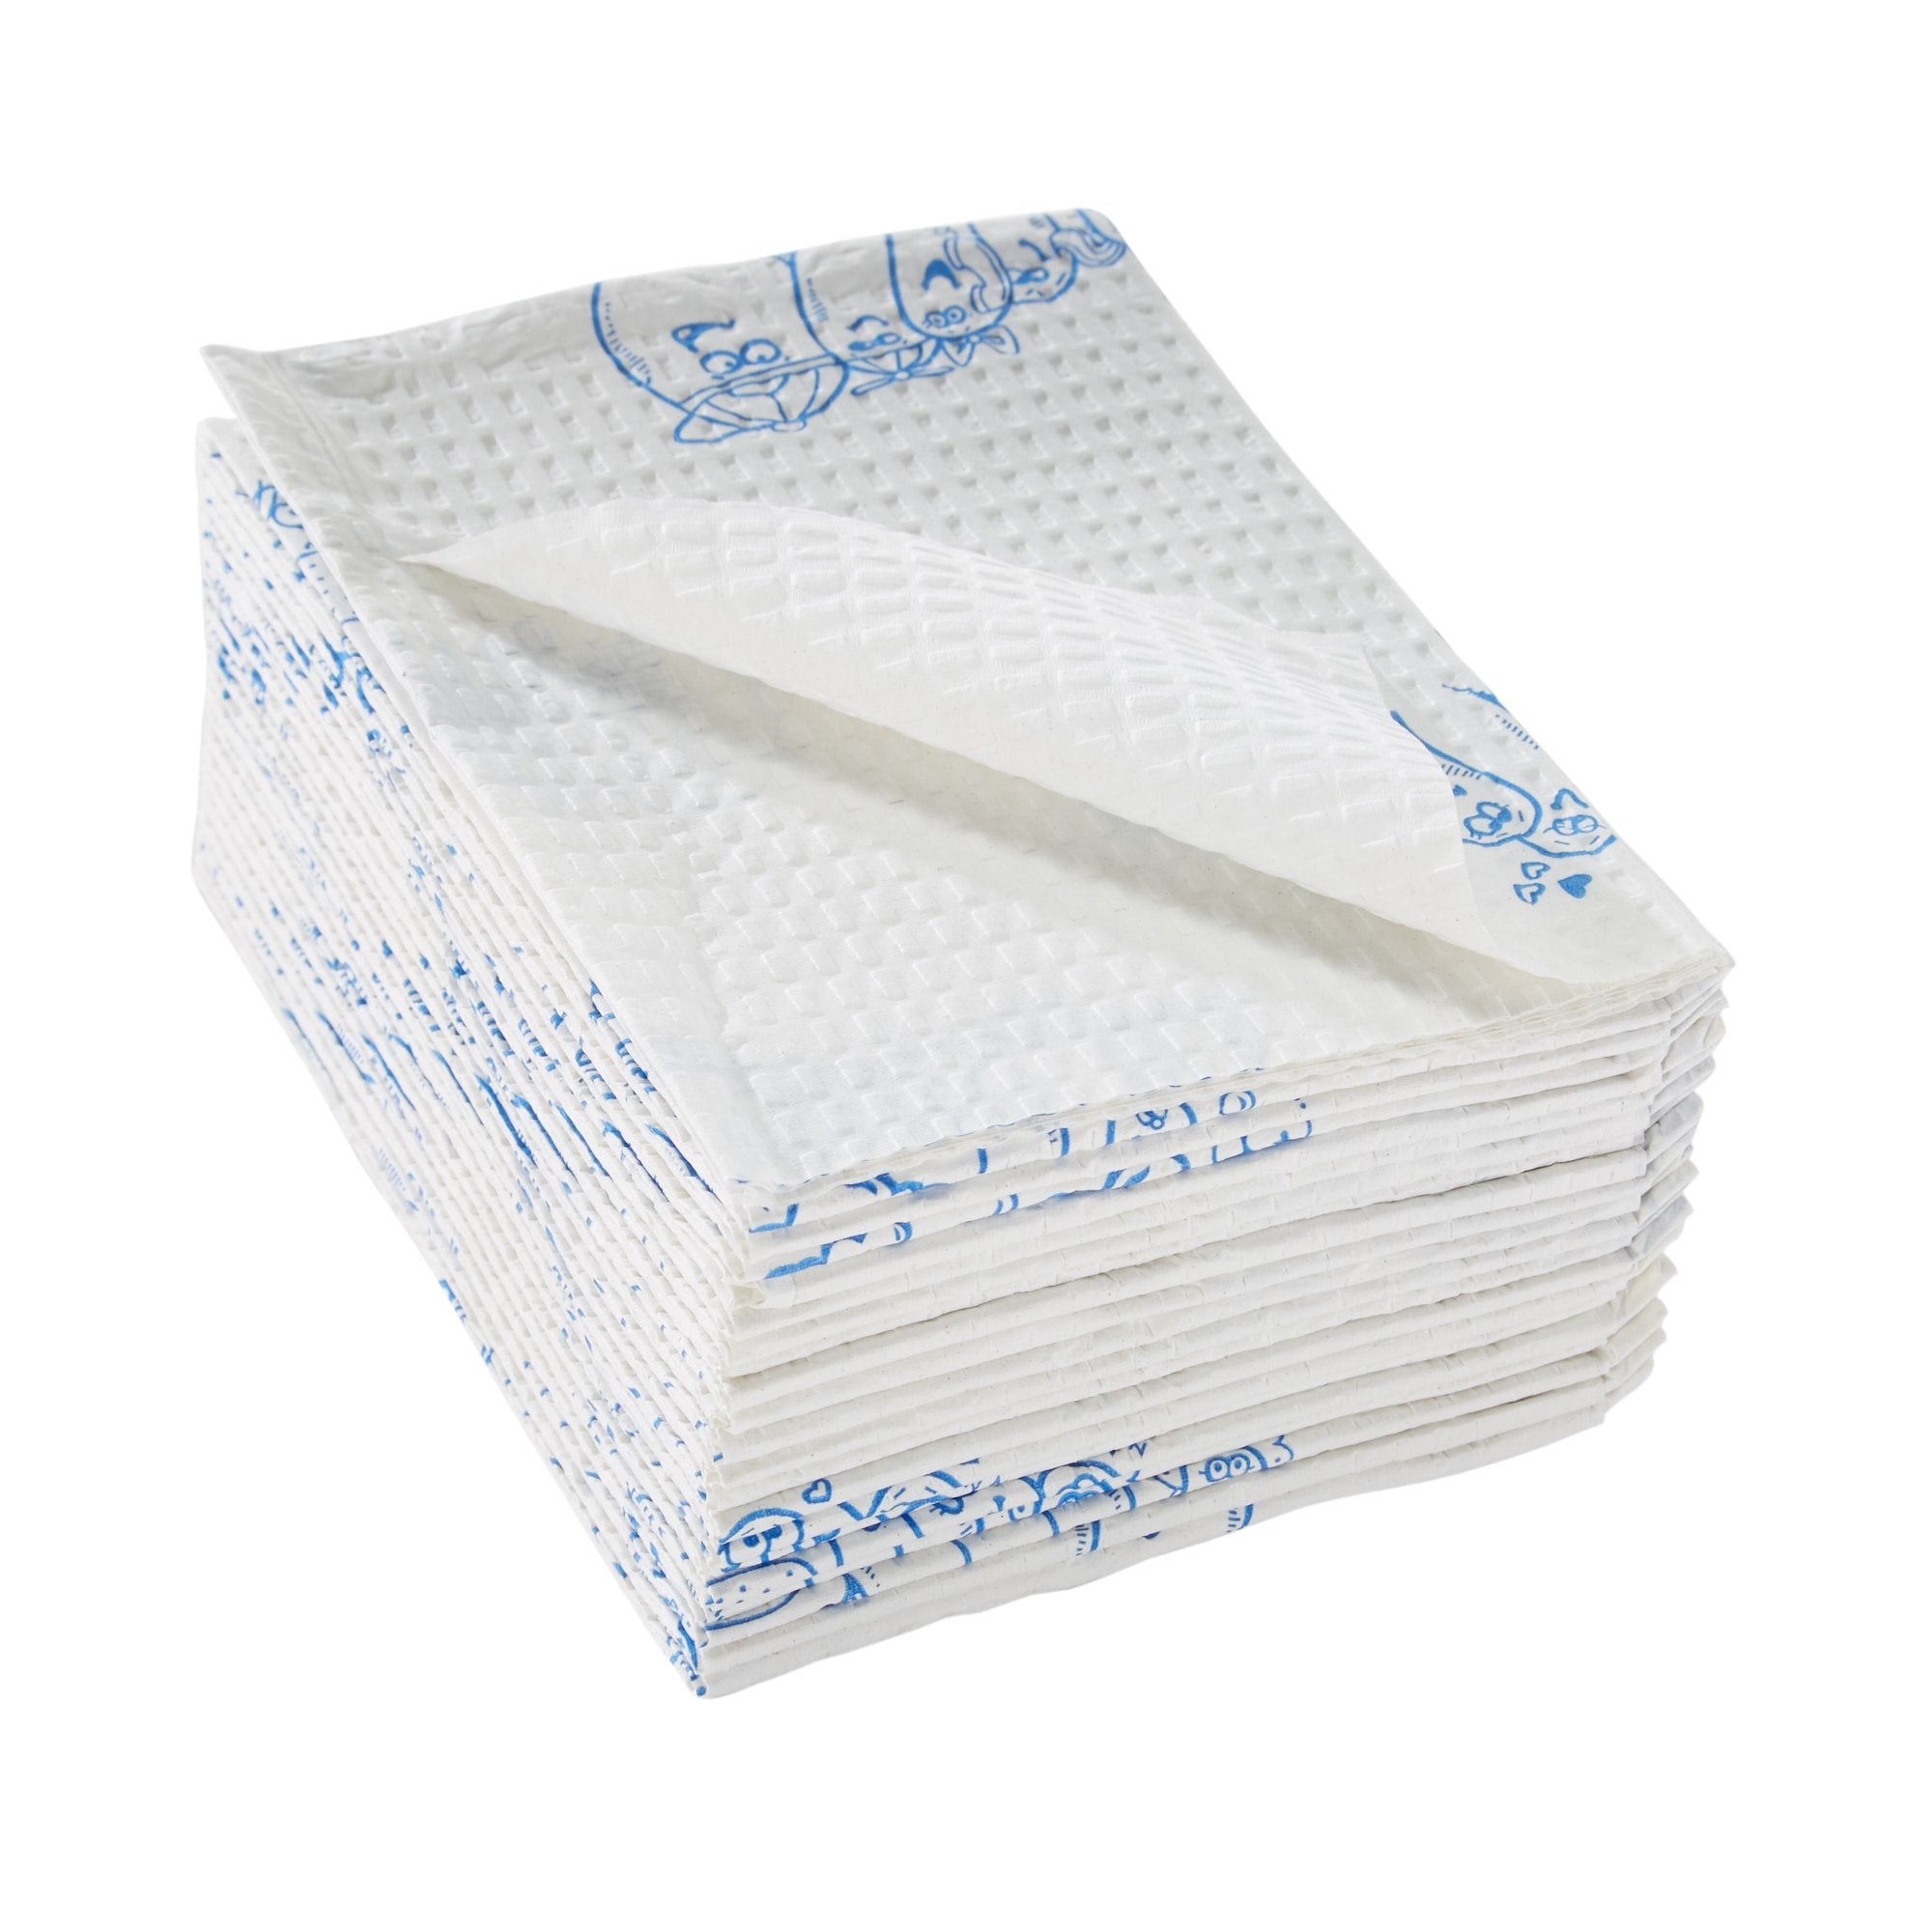 Household>Paper Towels - McKesson - Wasatch Medical Supply